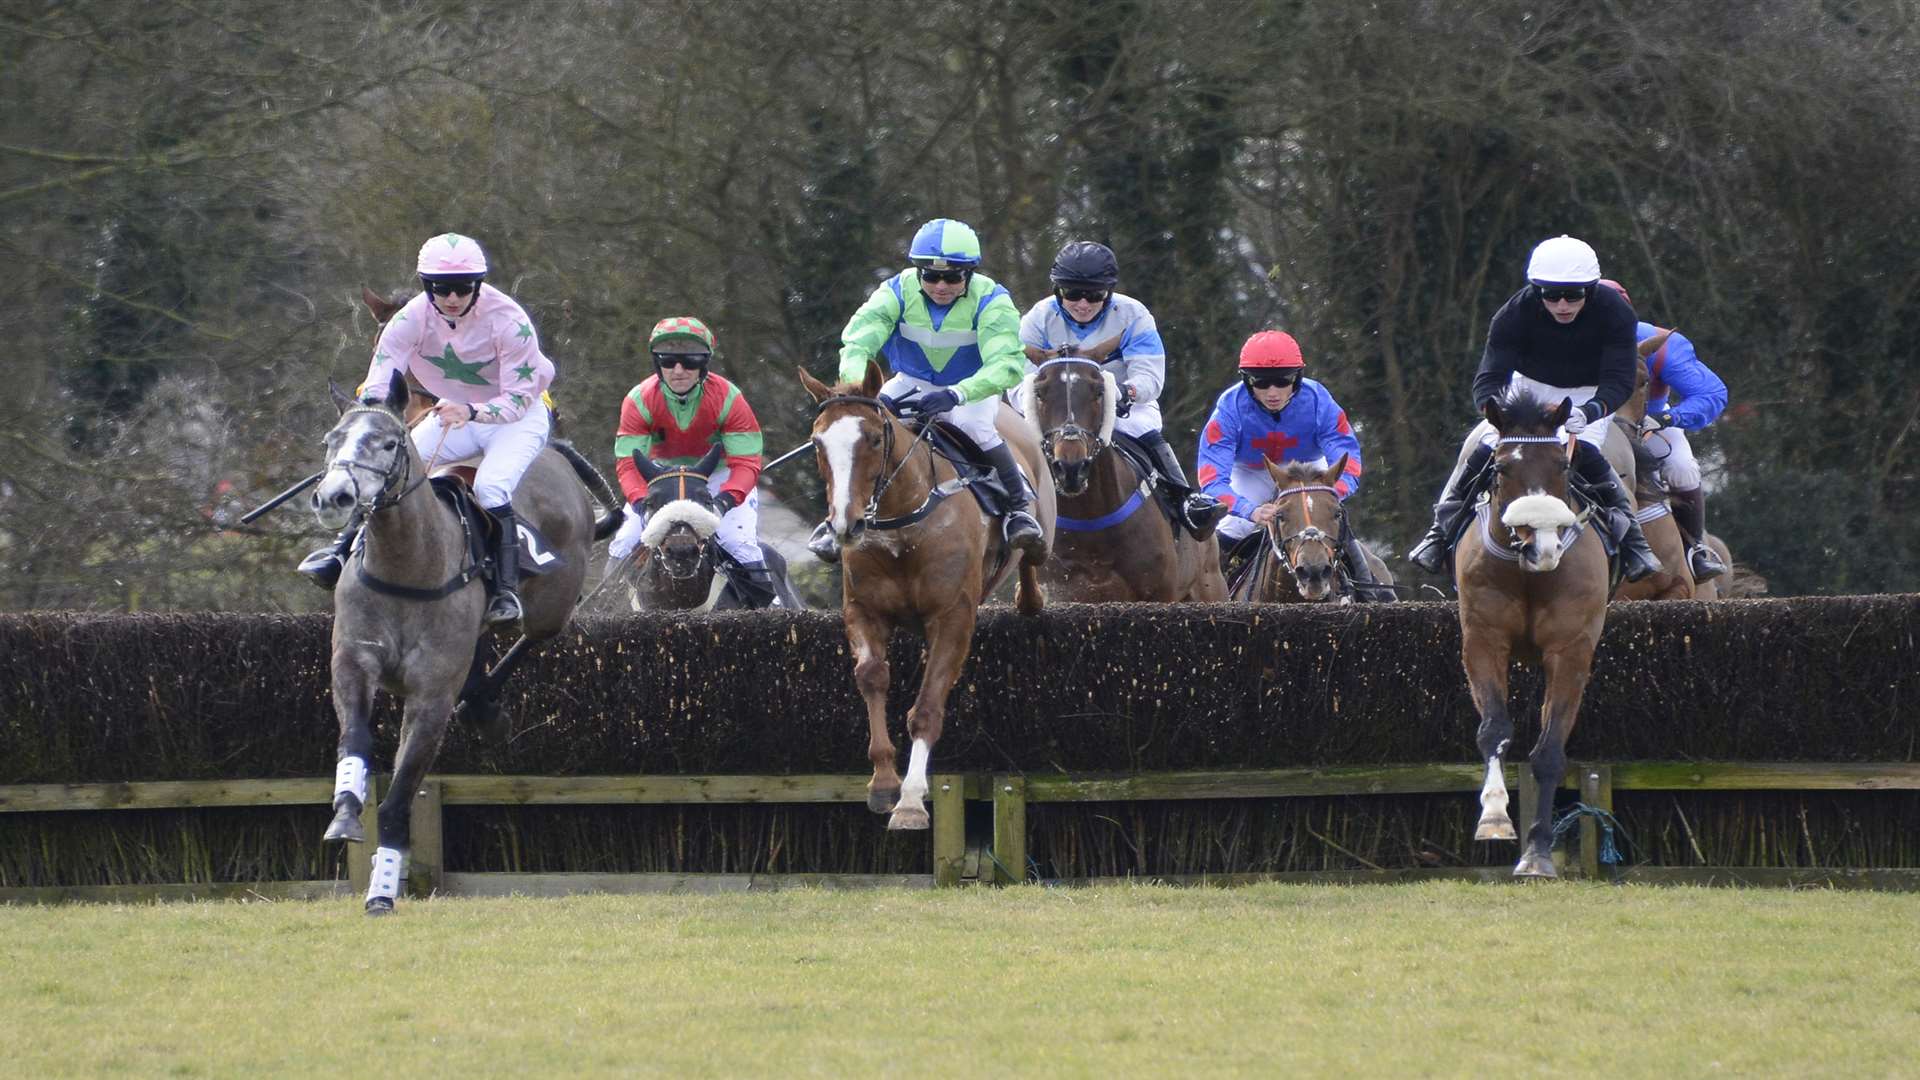 Point-to-point horse racing event will take place at Ashford Valley, Tickham